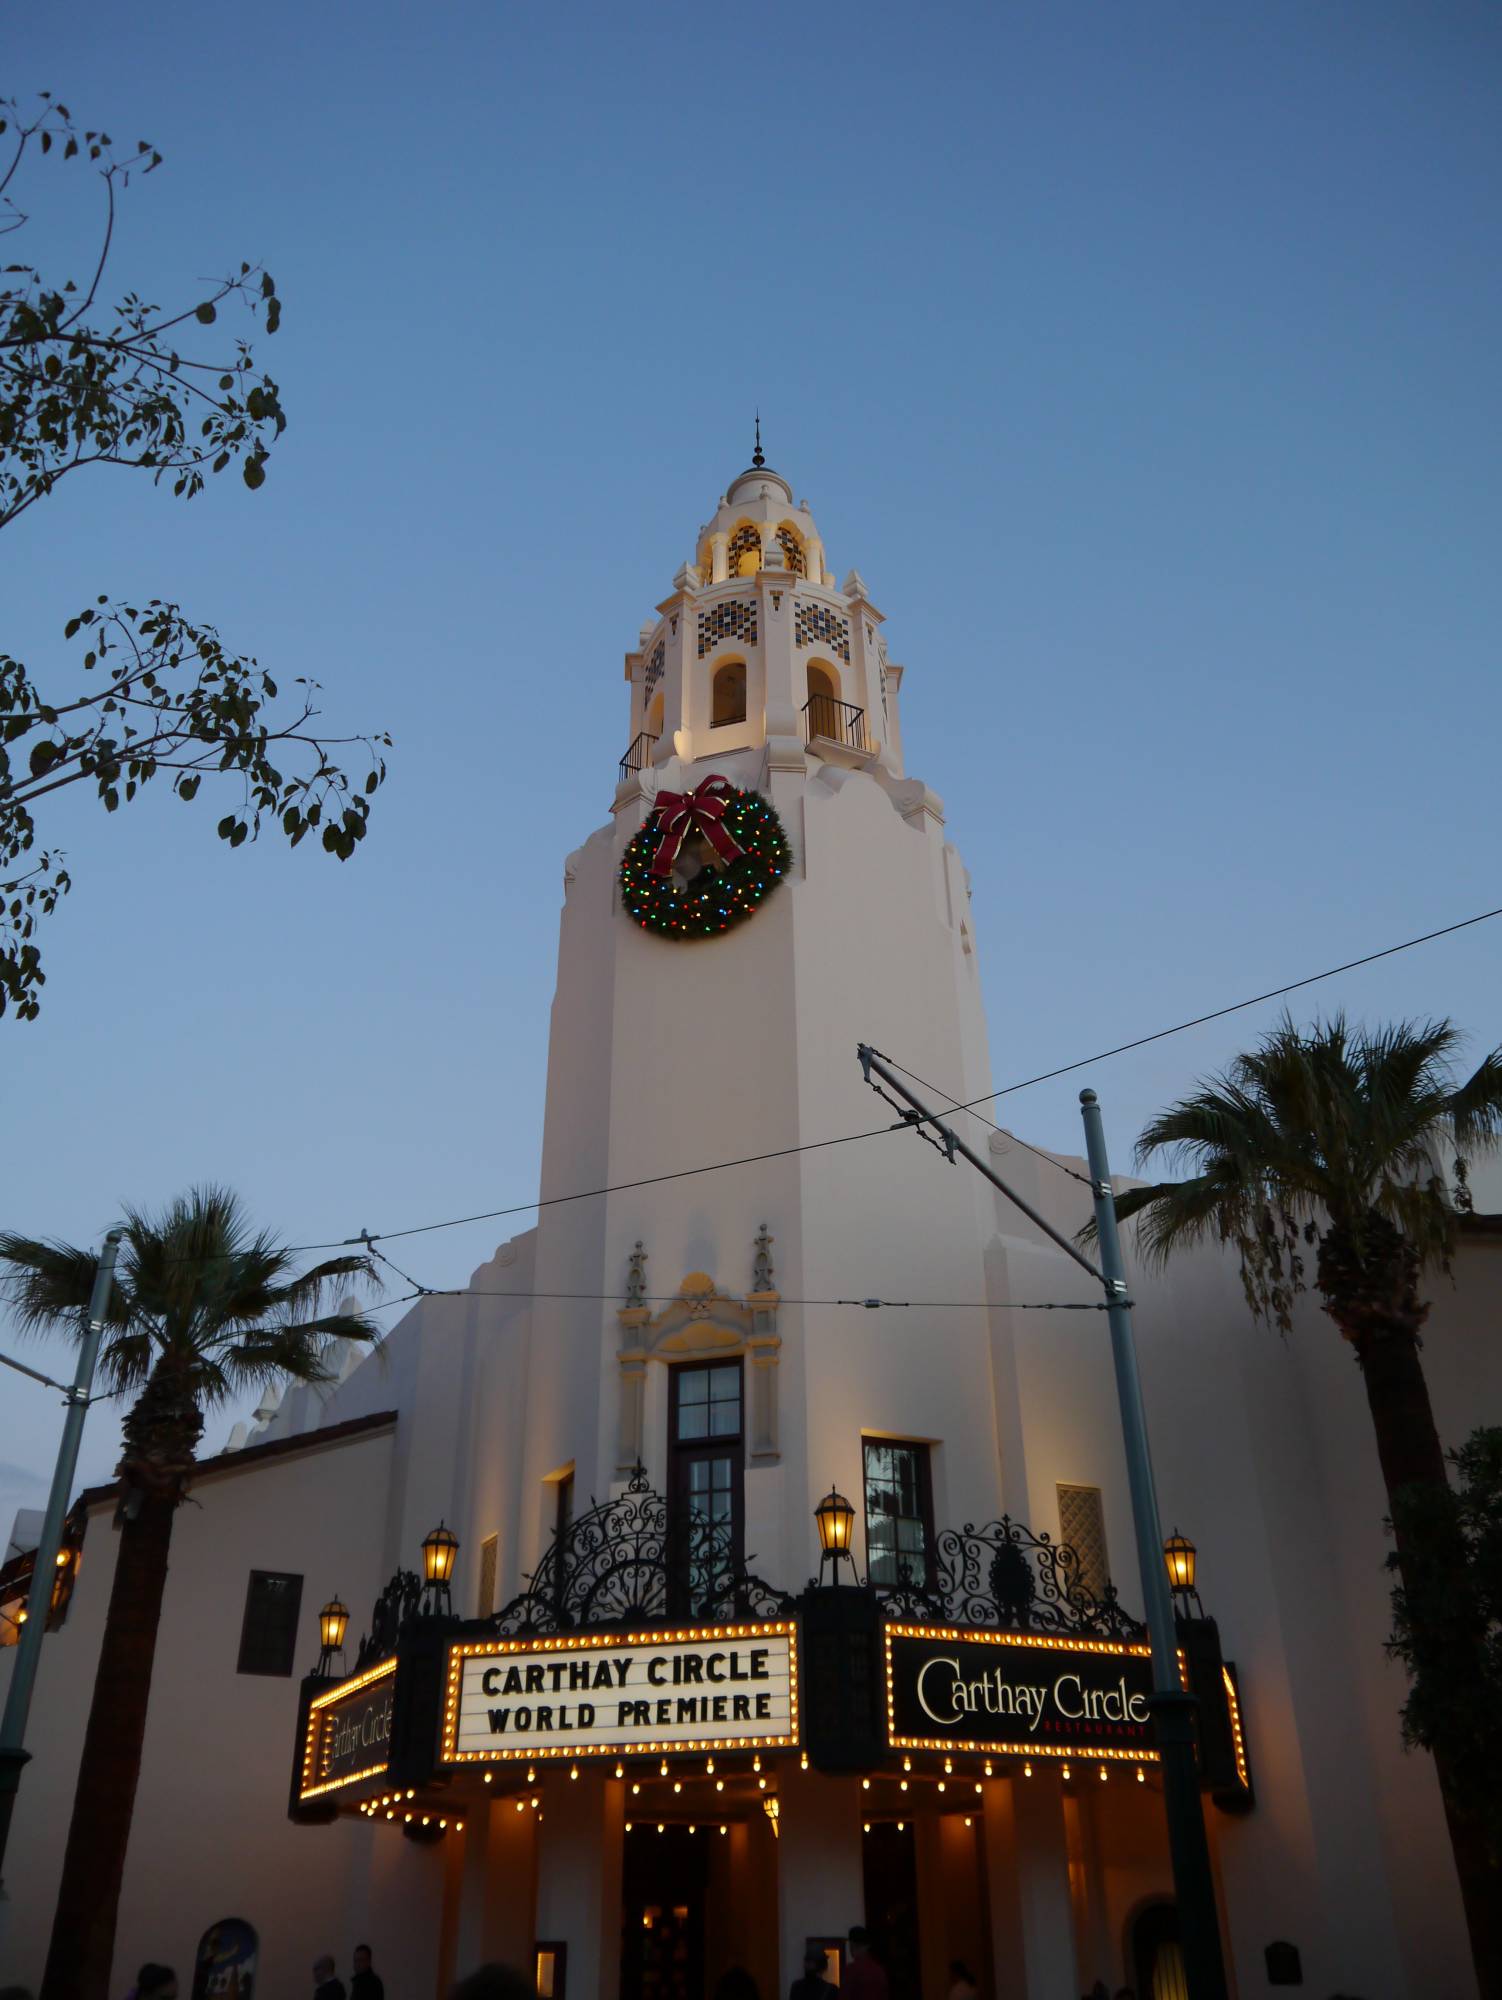 Enjoy an incredible meal surrounded by Disney history at Carthay Circle |PassPorter.com